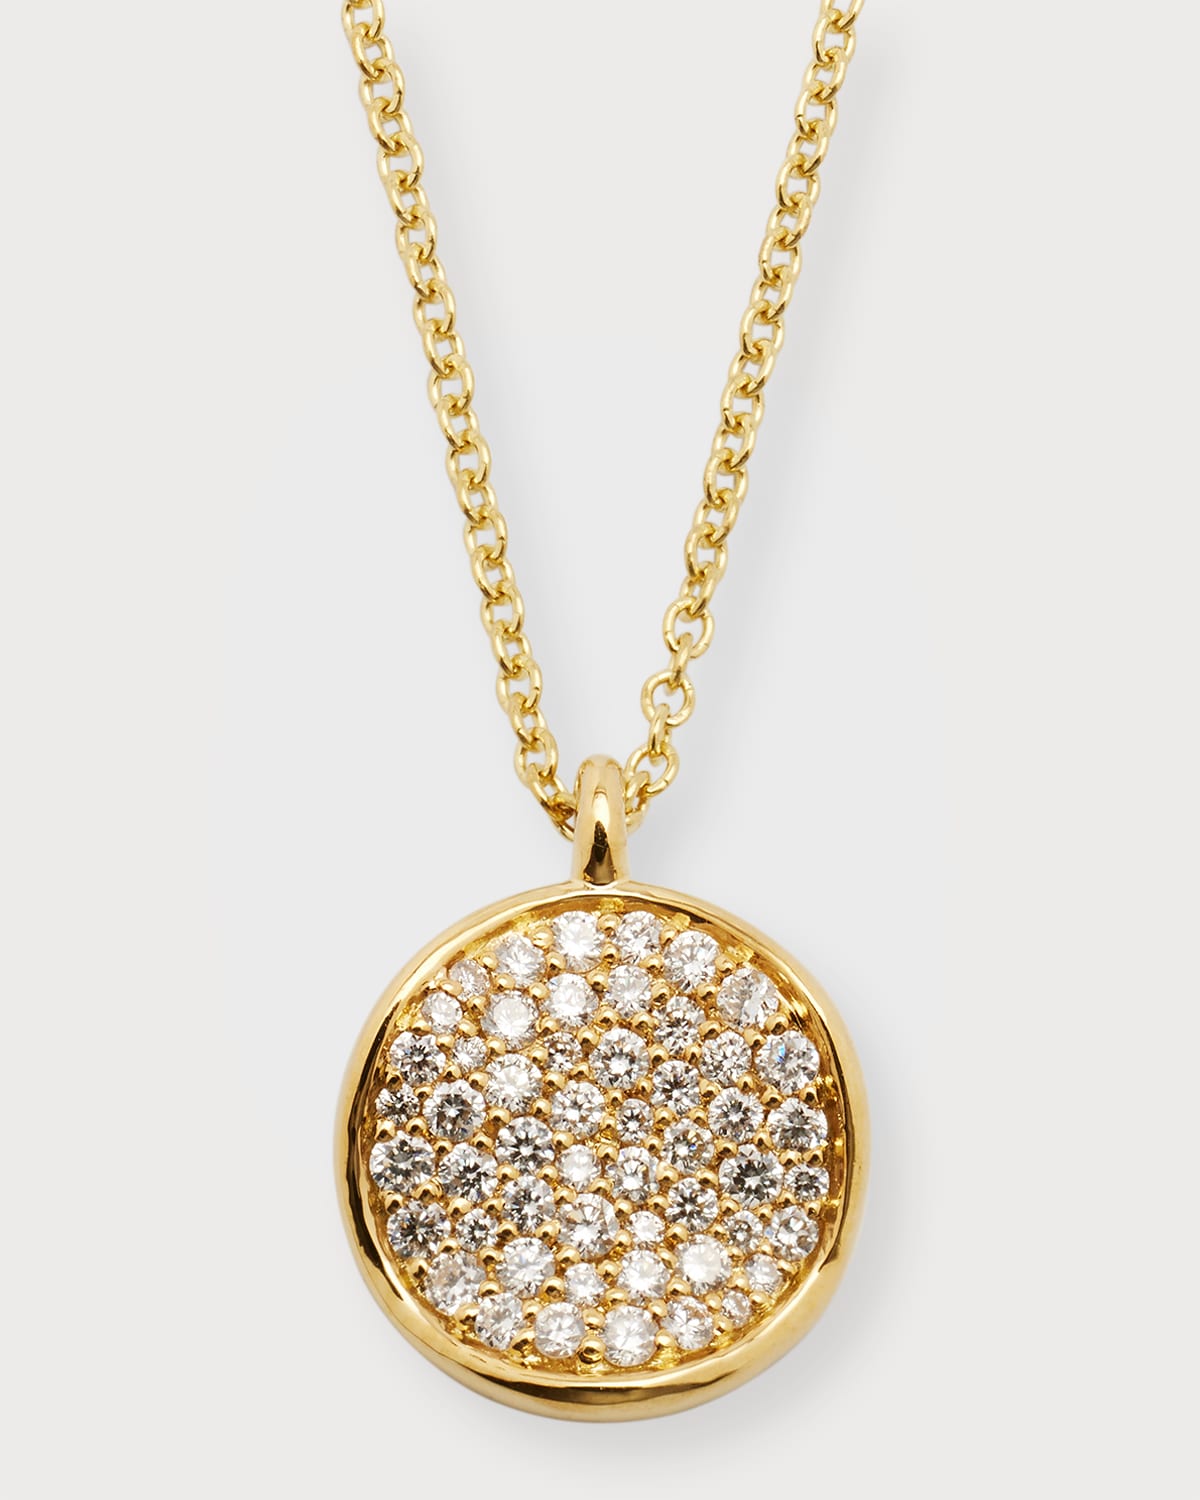 Small Flower Pendant Necklace in 18K Gold with Diamonds